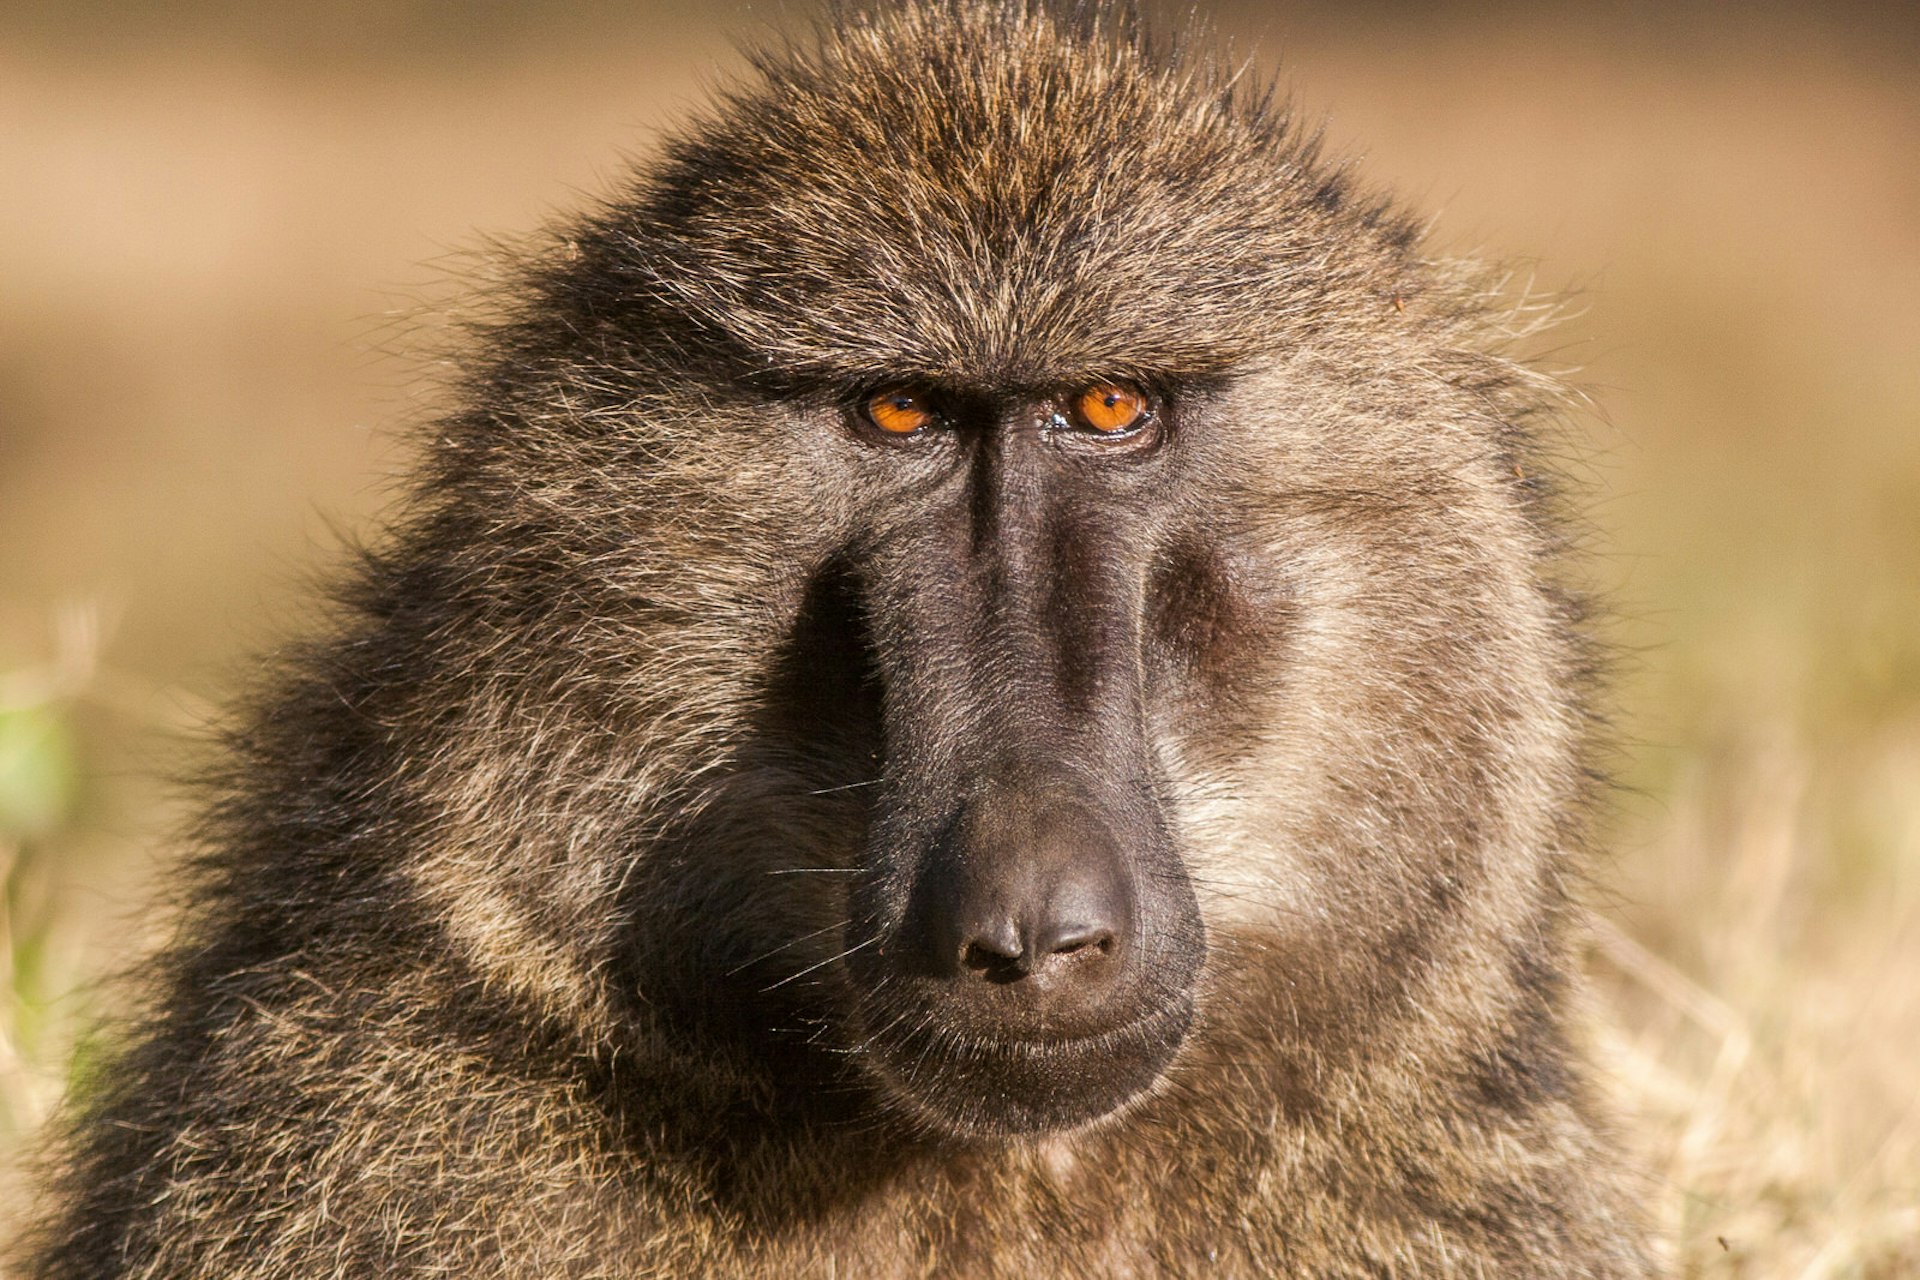 A profile of a baboon with piercing orange eyes.